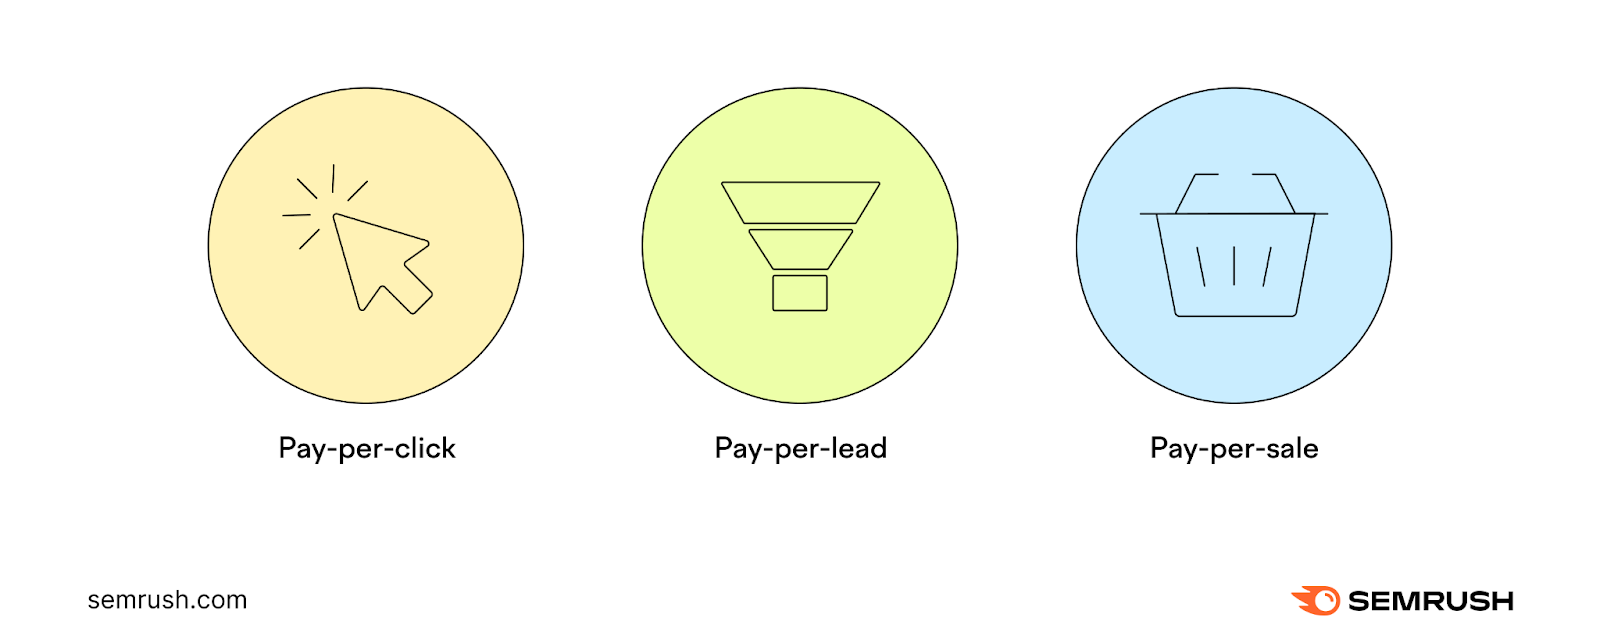 An illustration showing pay-per-click, pay-per-lead, and pay-per-sale commission structures